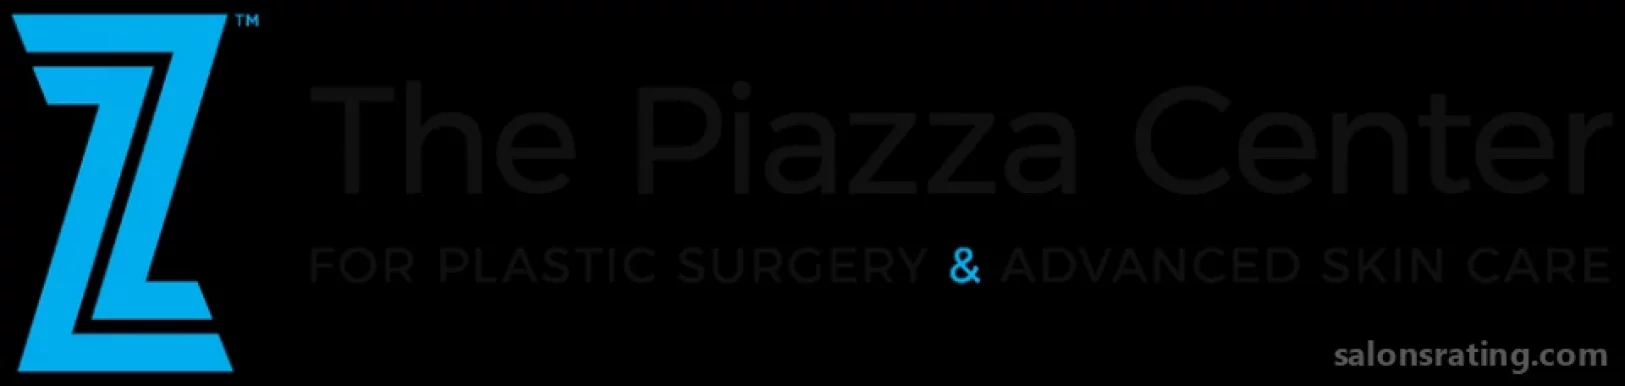 Piazza Center for Plastic Surgery and Advanced Skin Care, Austin - Photo 1